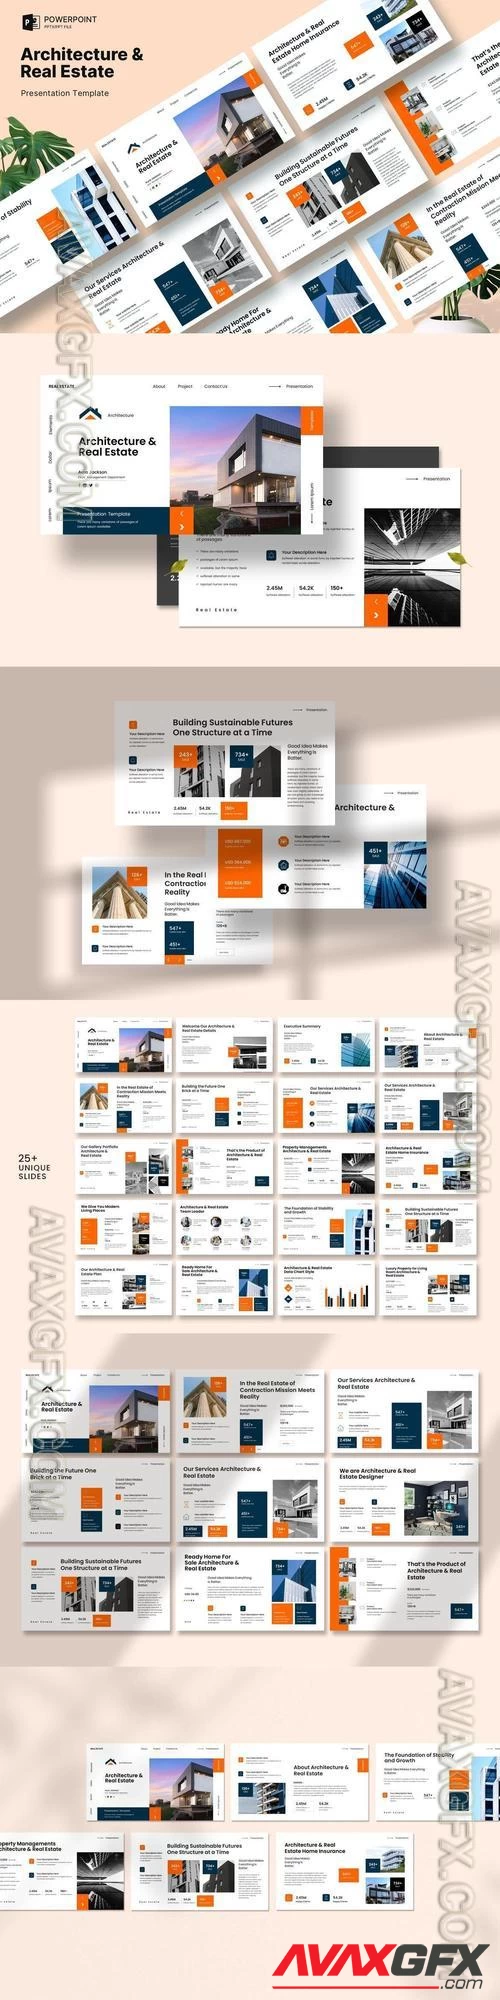 Architecture and Real Estate Presentation Template